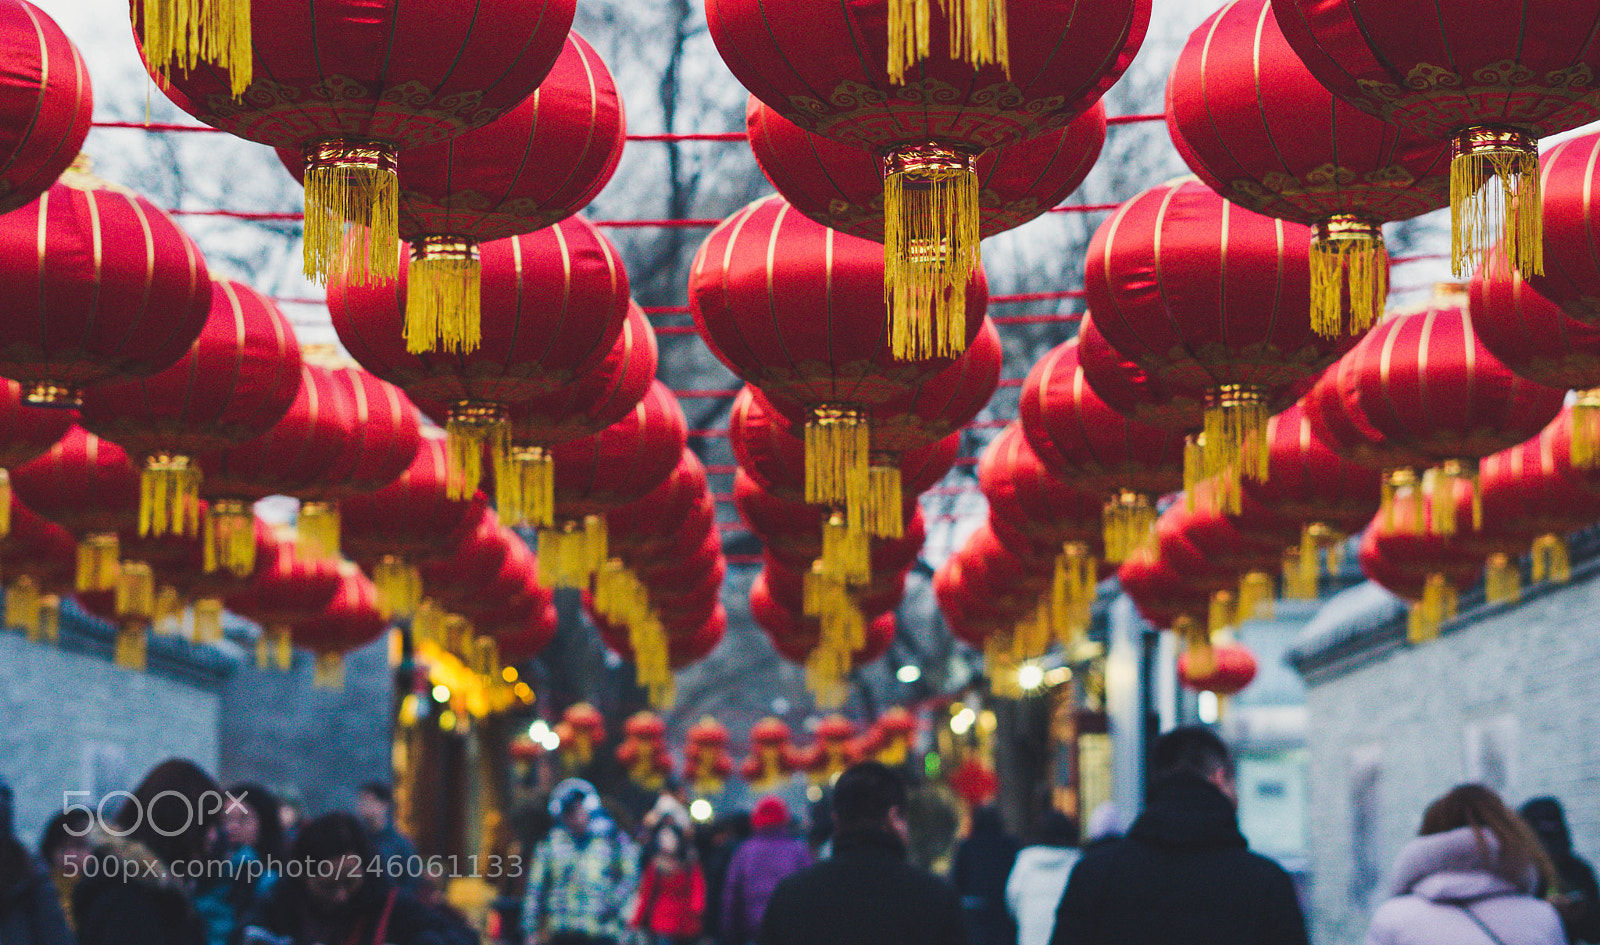 Sony a6000 sample photo. Chinese lanterns photography